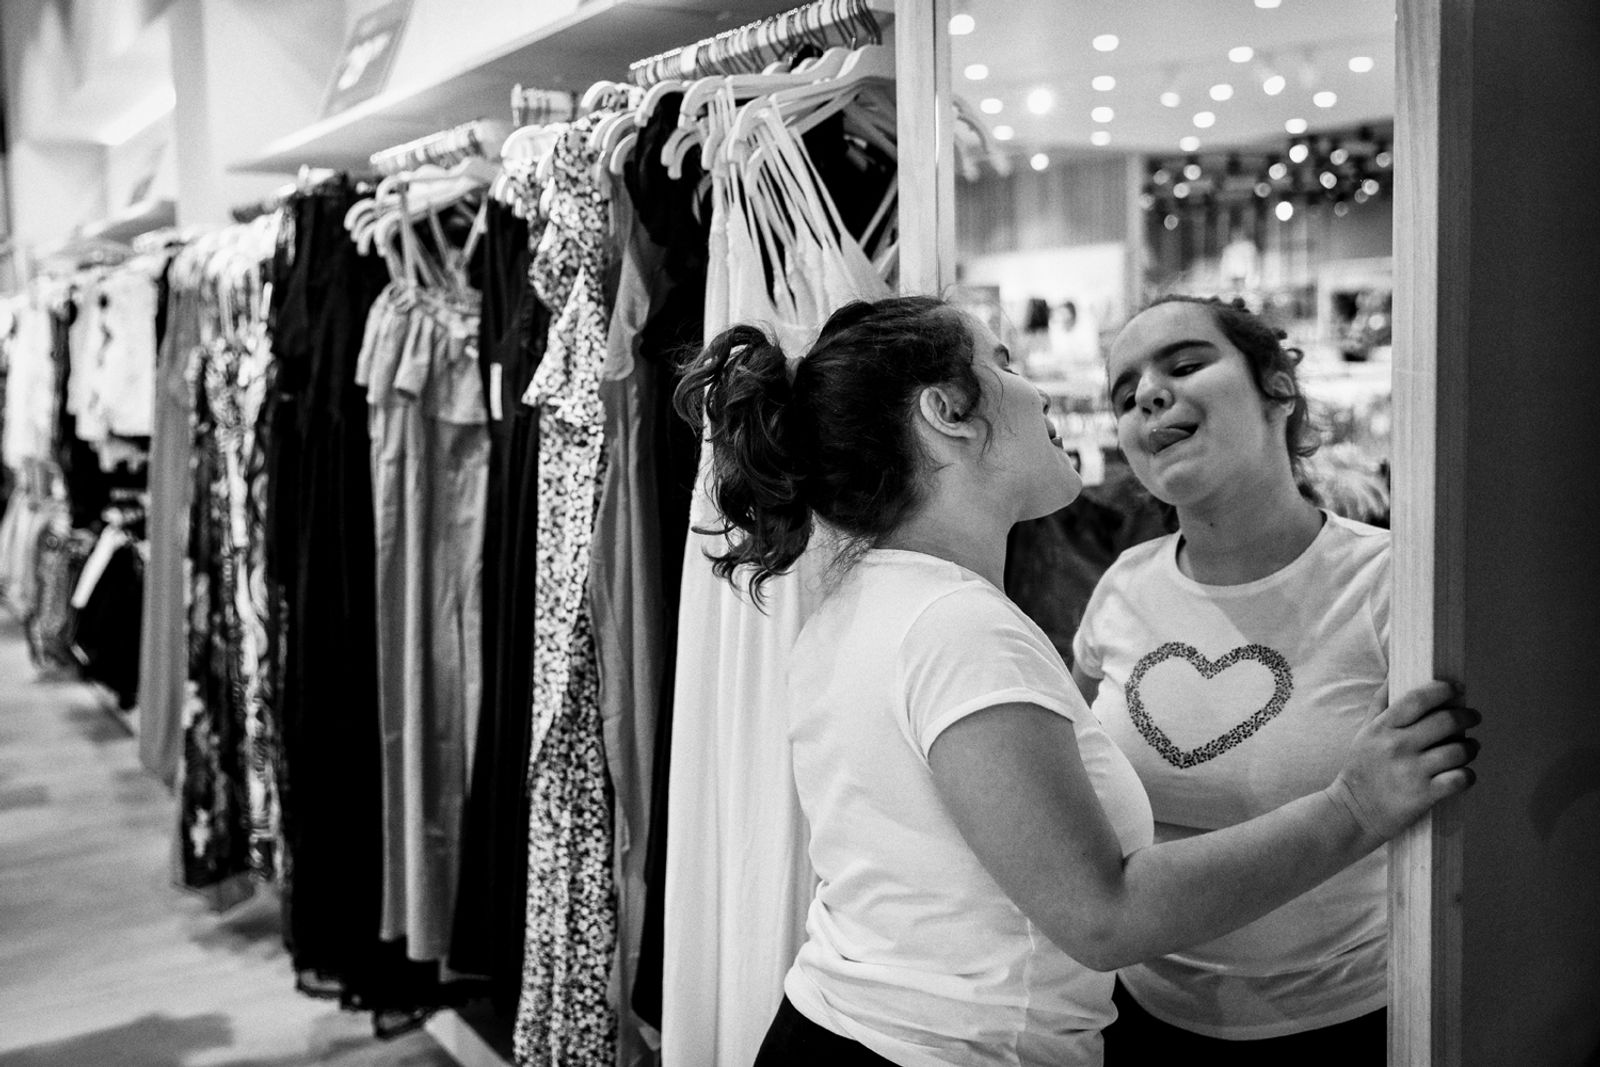 © BARBARA ZANON - Perugia, July 2018: Luisa(12) tries to choose some t-shirts to buy at the supermarket with her outreach worker